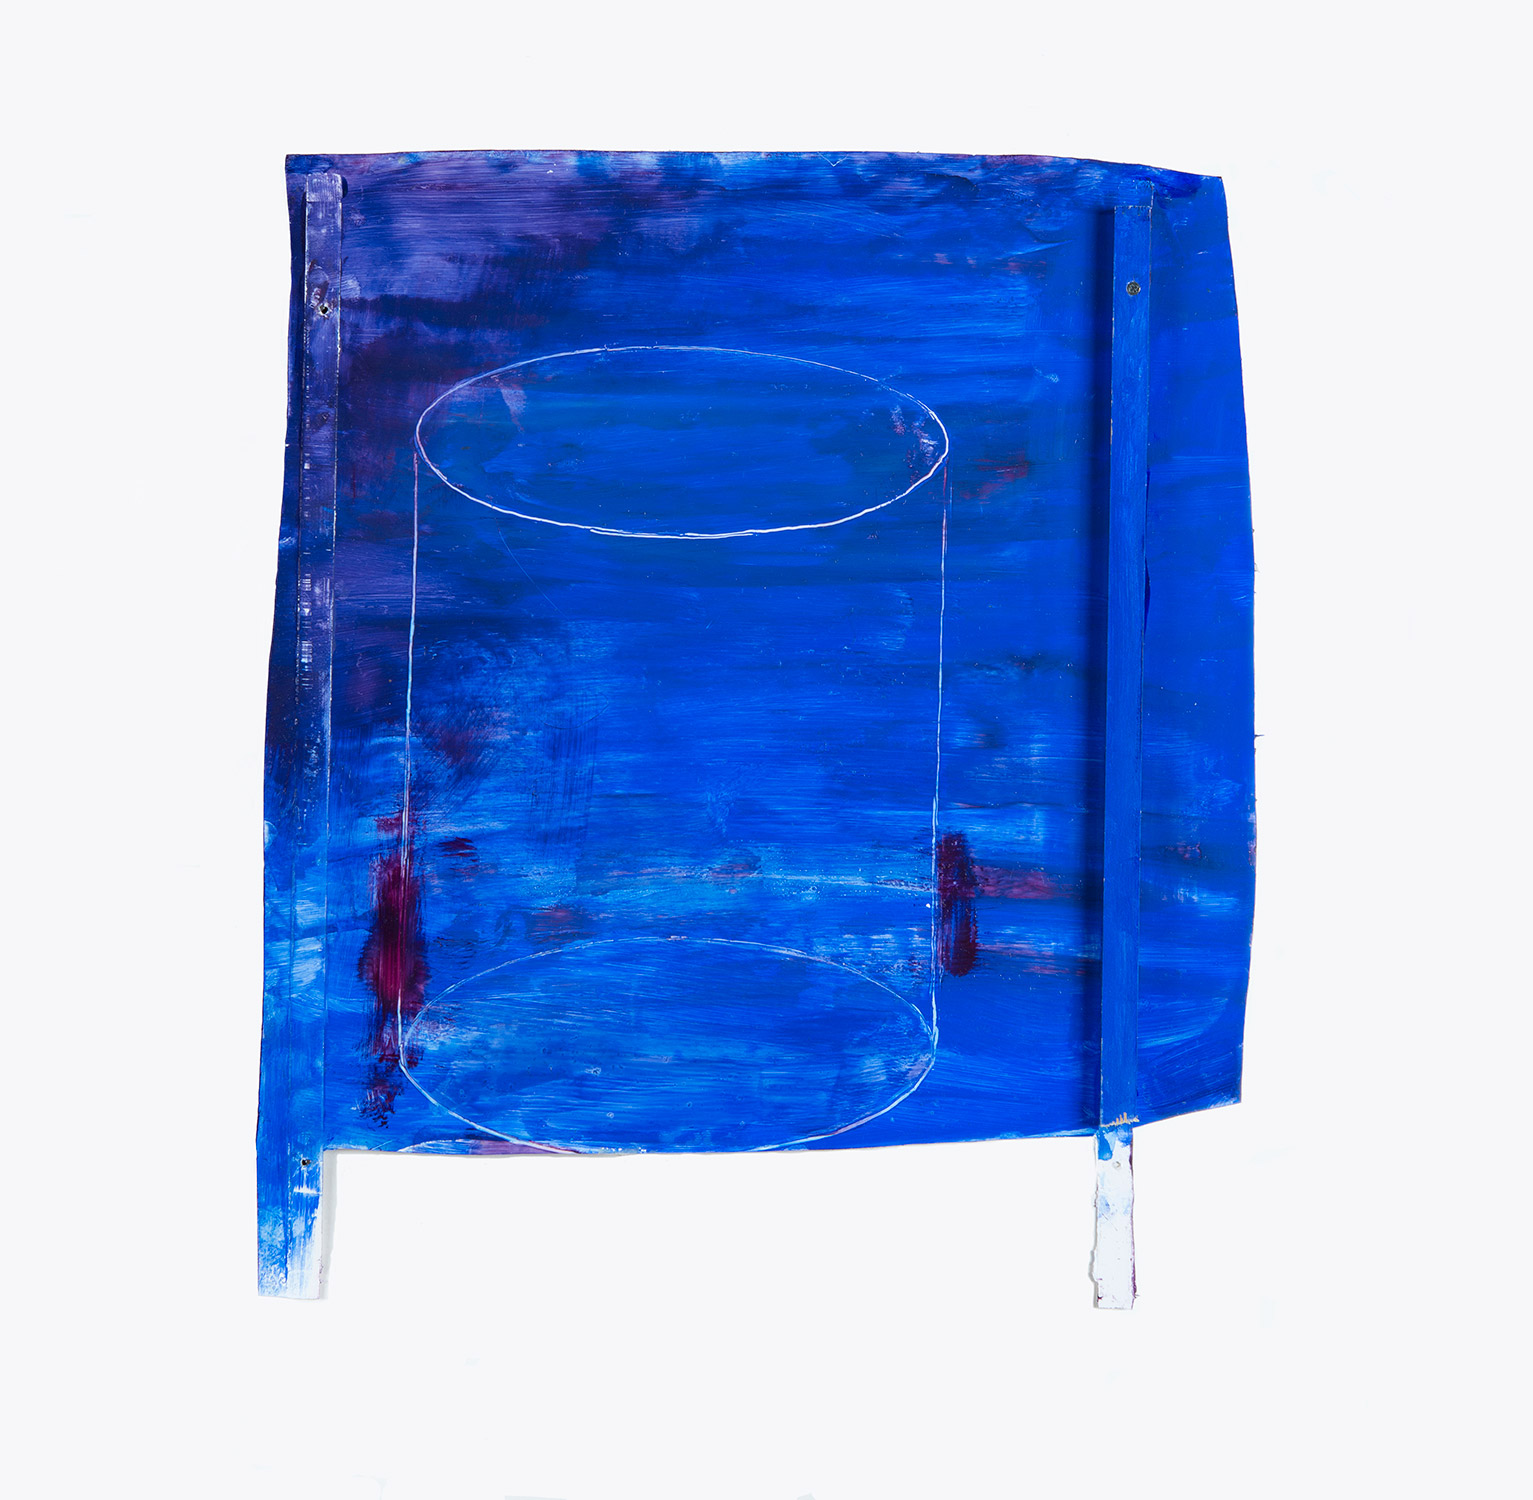   Possibly Now   Oil on plastic, wood  17 × 14.5 × ½  inches   42 × 37 × 1 cm 2013   &nbsp; 